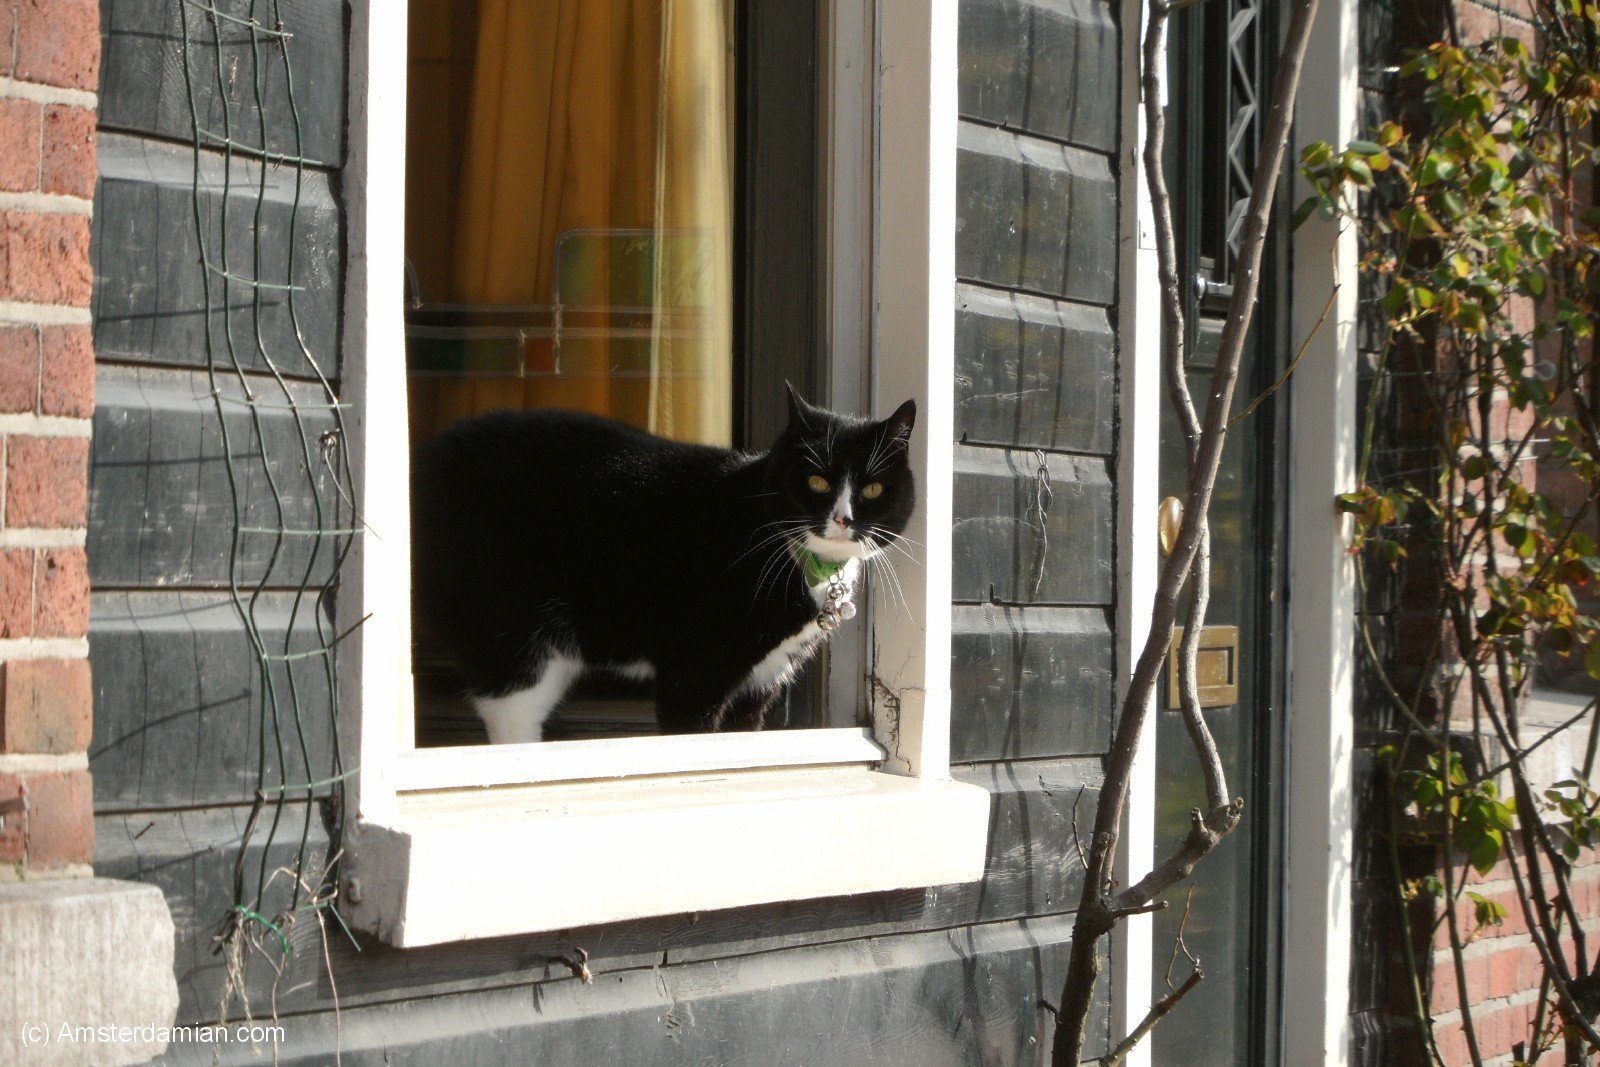 The cats of Amsterdam | Amsterdamian -